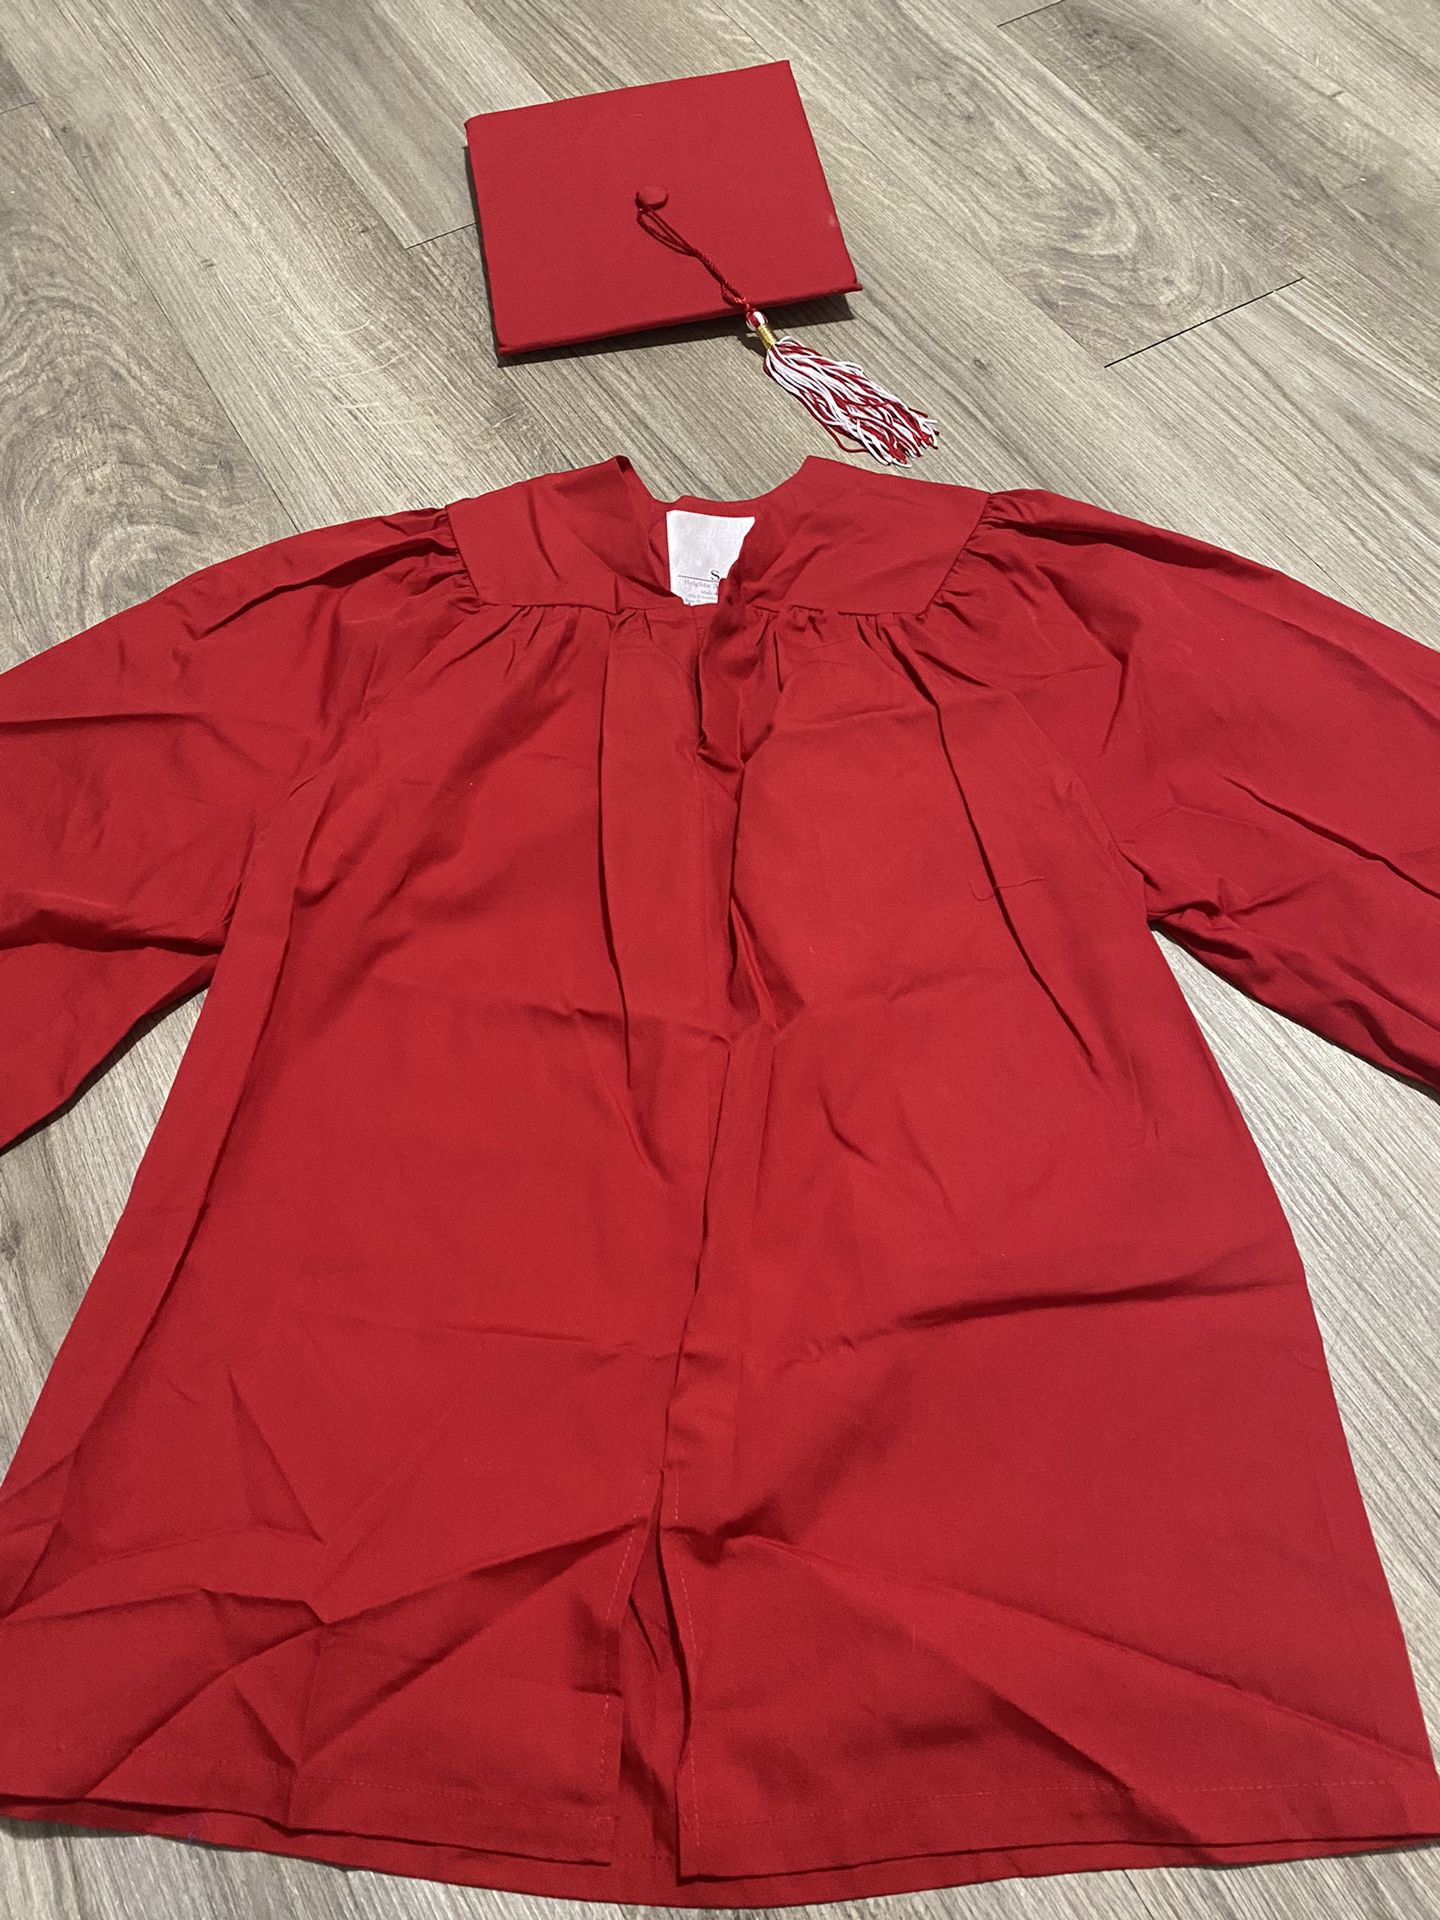 Red kid Size Graduation Gown